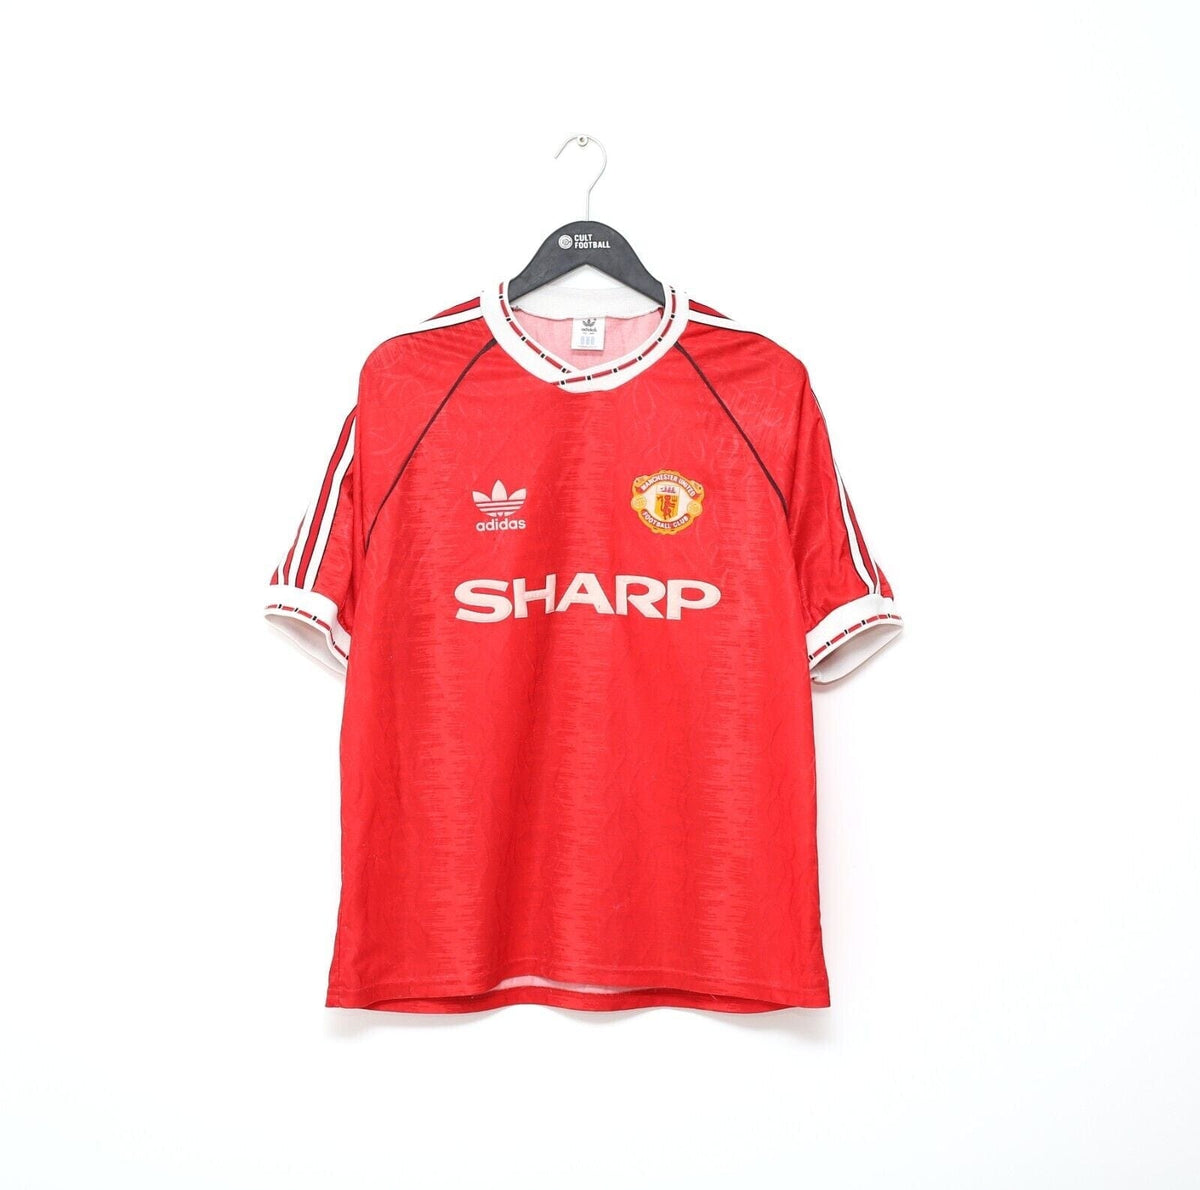 old manchester united shirts